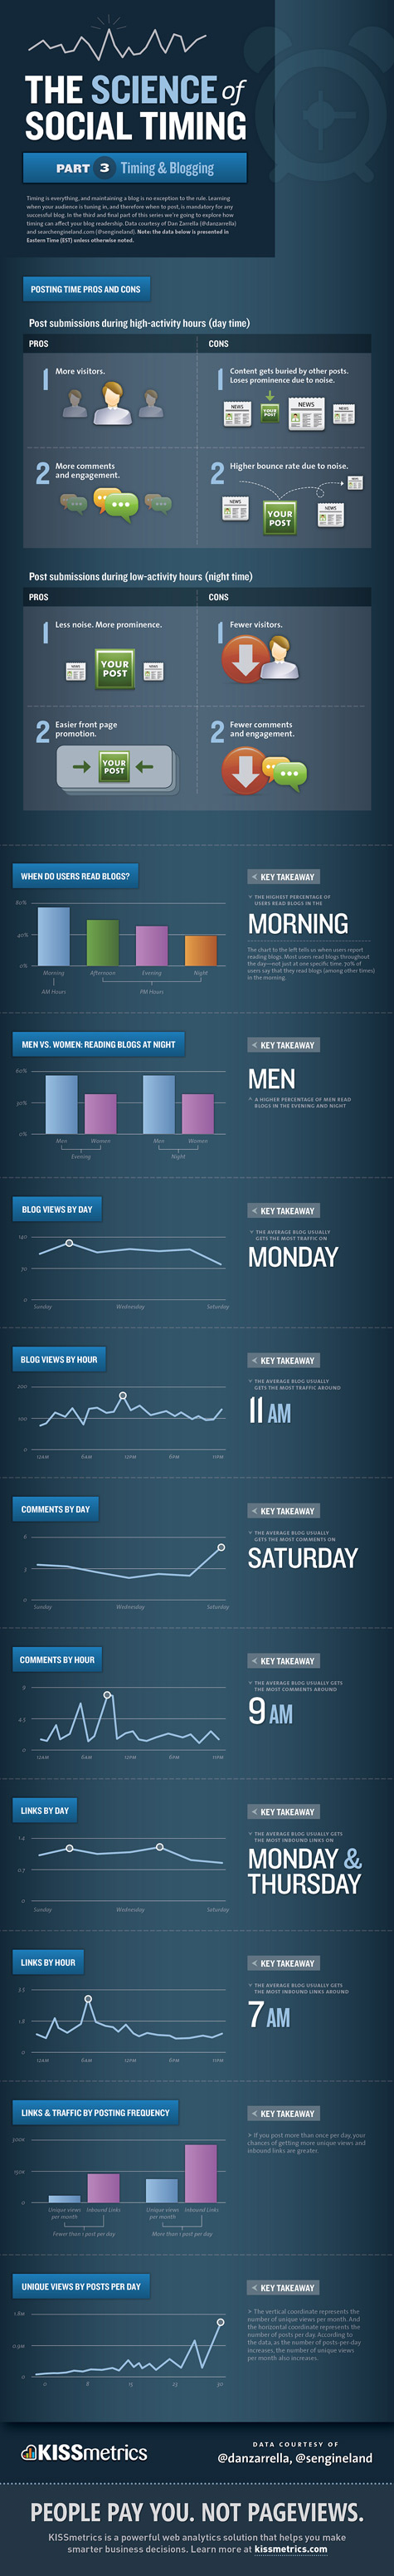 infographic Science of Social Timing